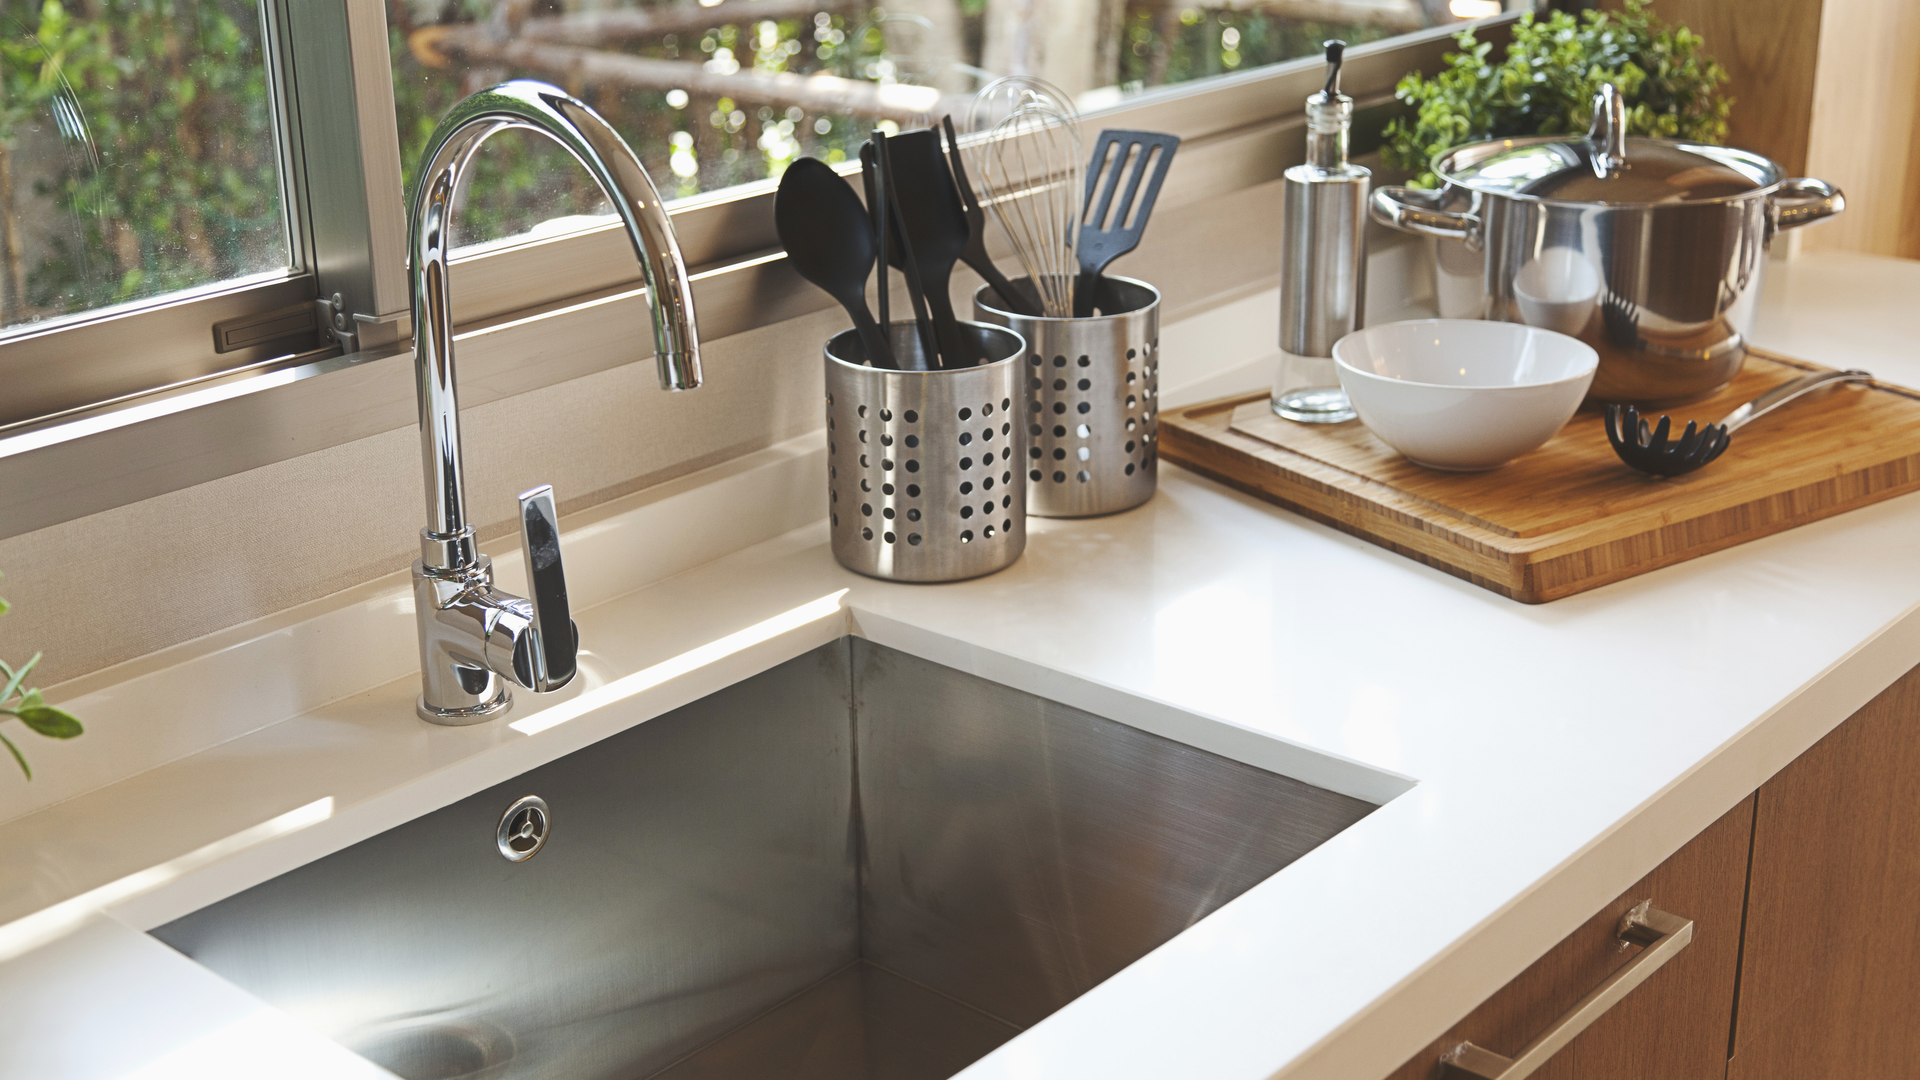 The best 5 kitchen sink materials – and how to choose the best type and design for your home